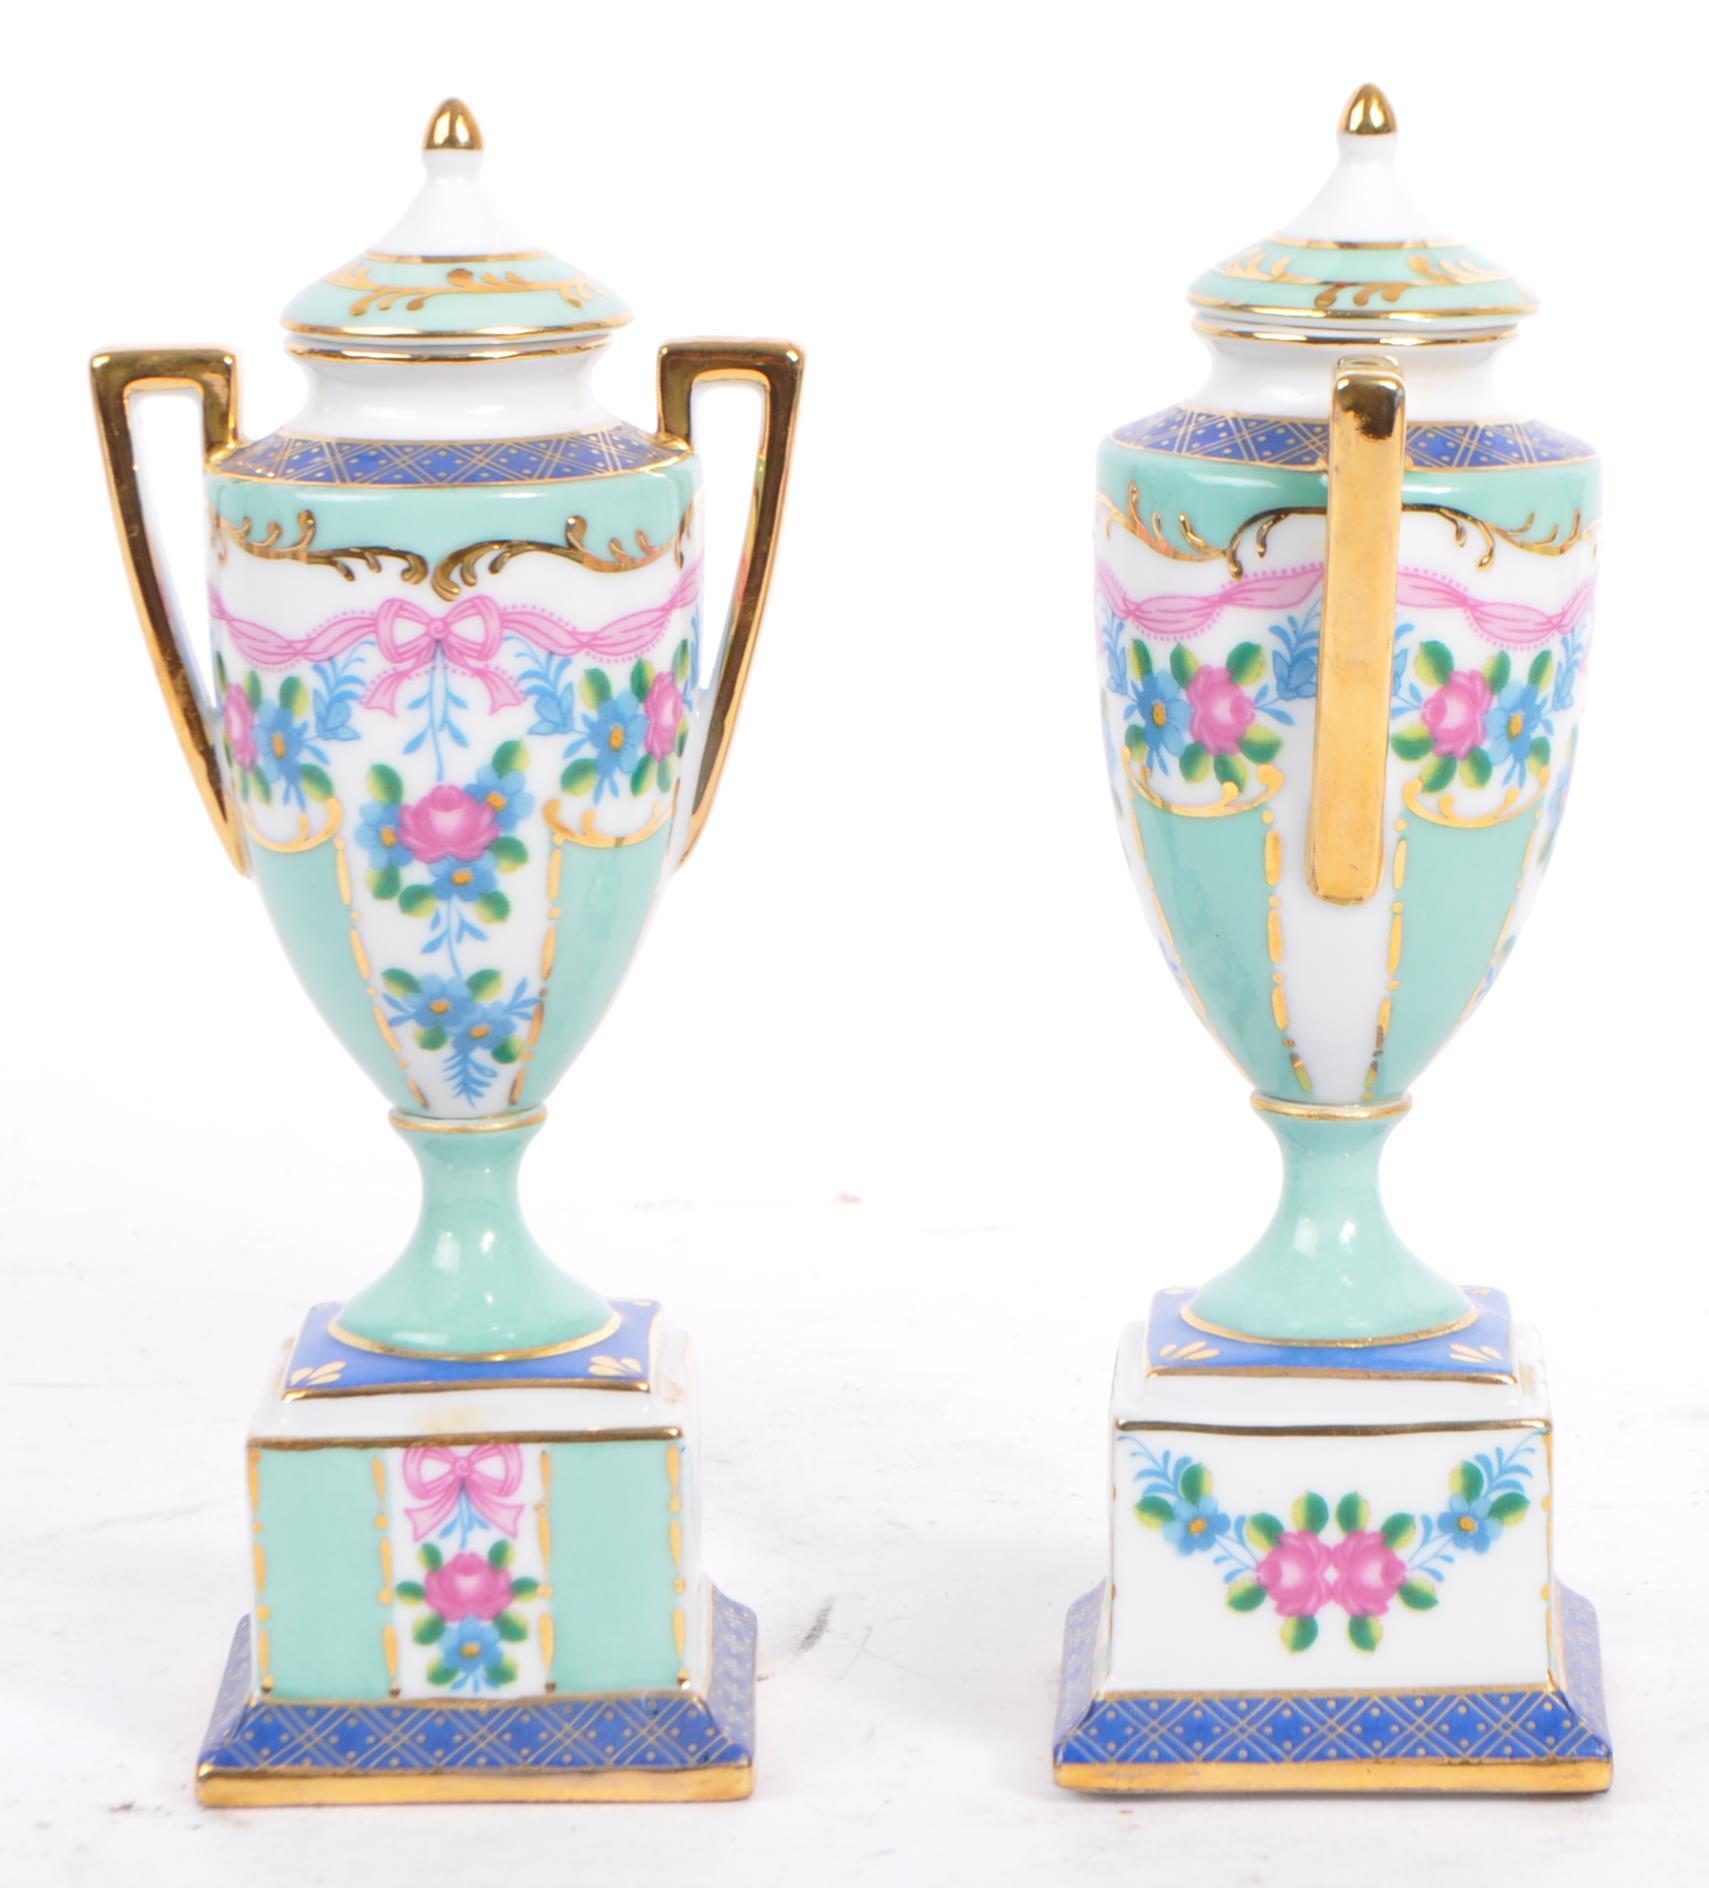 COLLECTION OF MINIATURE PORCELAIN VASES / URNS ETC. - Image 2 of 6